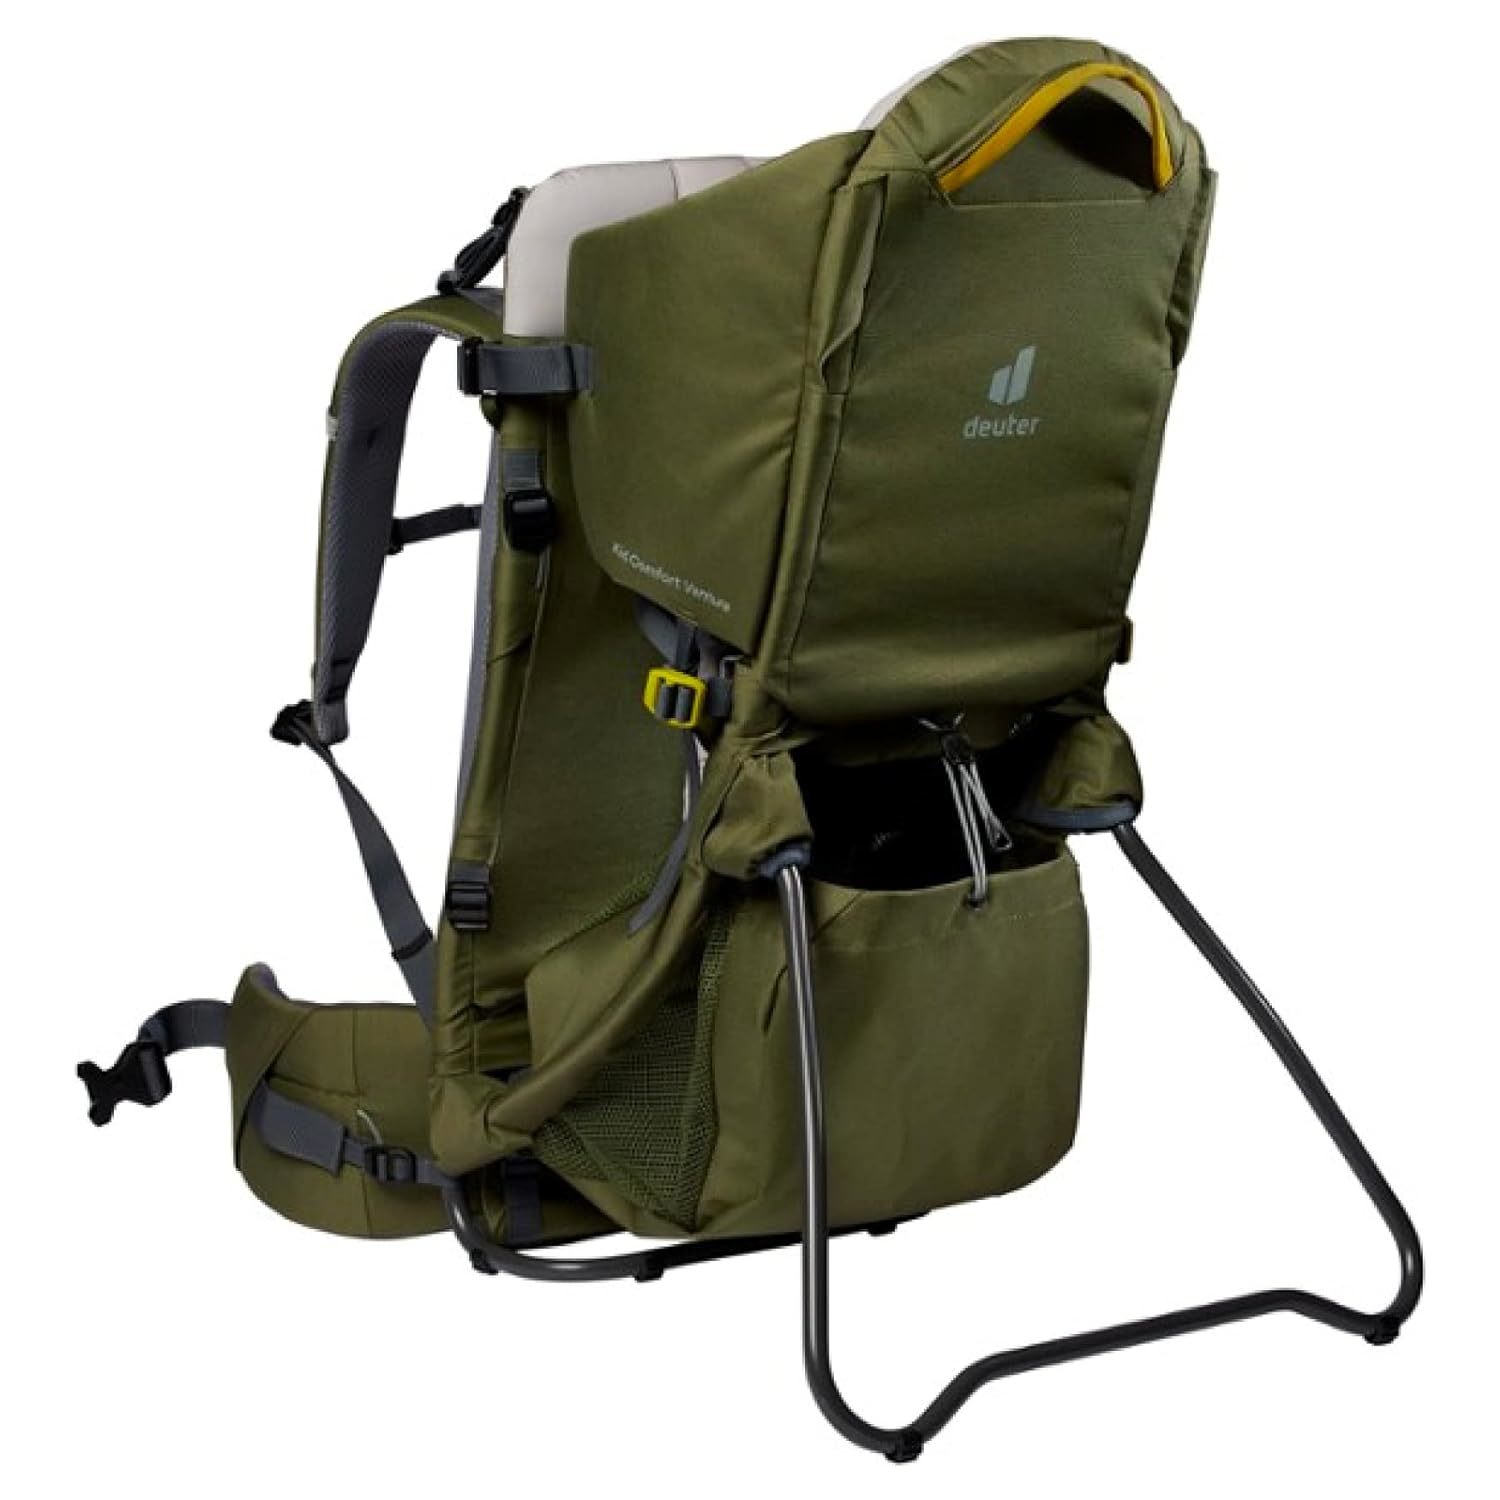 Child Carrier For Hiking And Backpacking: and 50 similar items